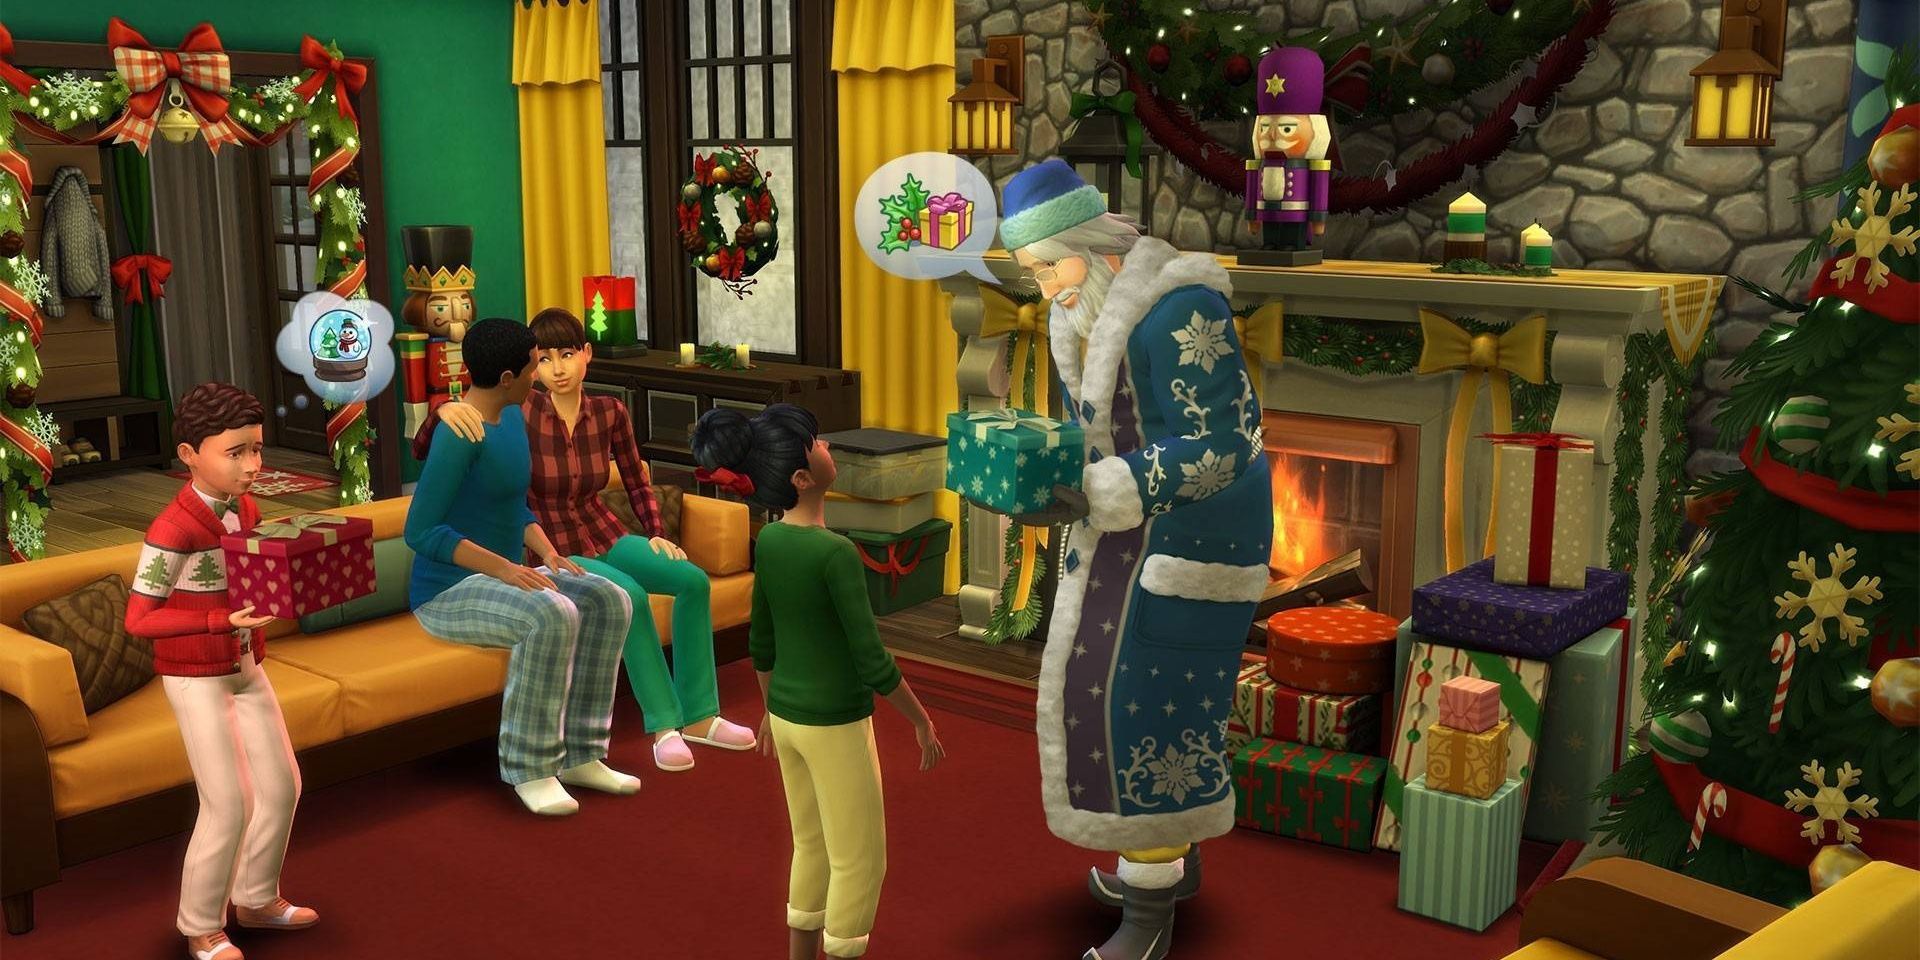 A family celebrates Winterfest with Father Winter and gift in The Sims 4. Two parents sit together on the couch, while their two children open presents. One of the children talks to Father Winter.